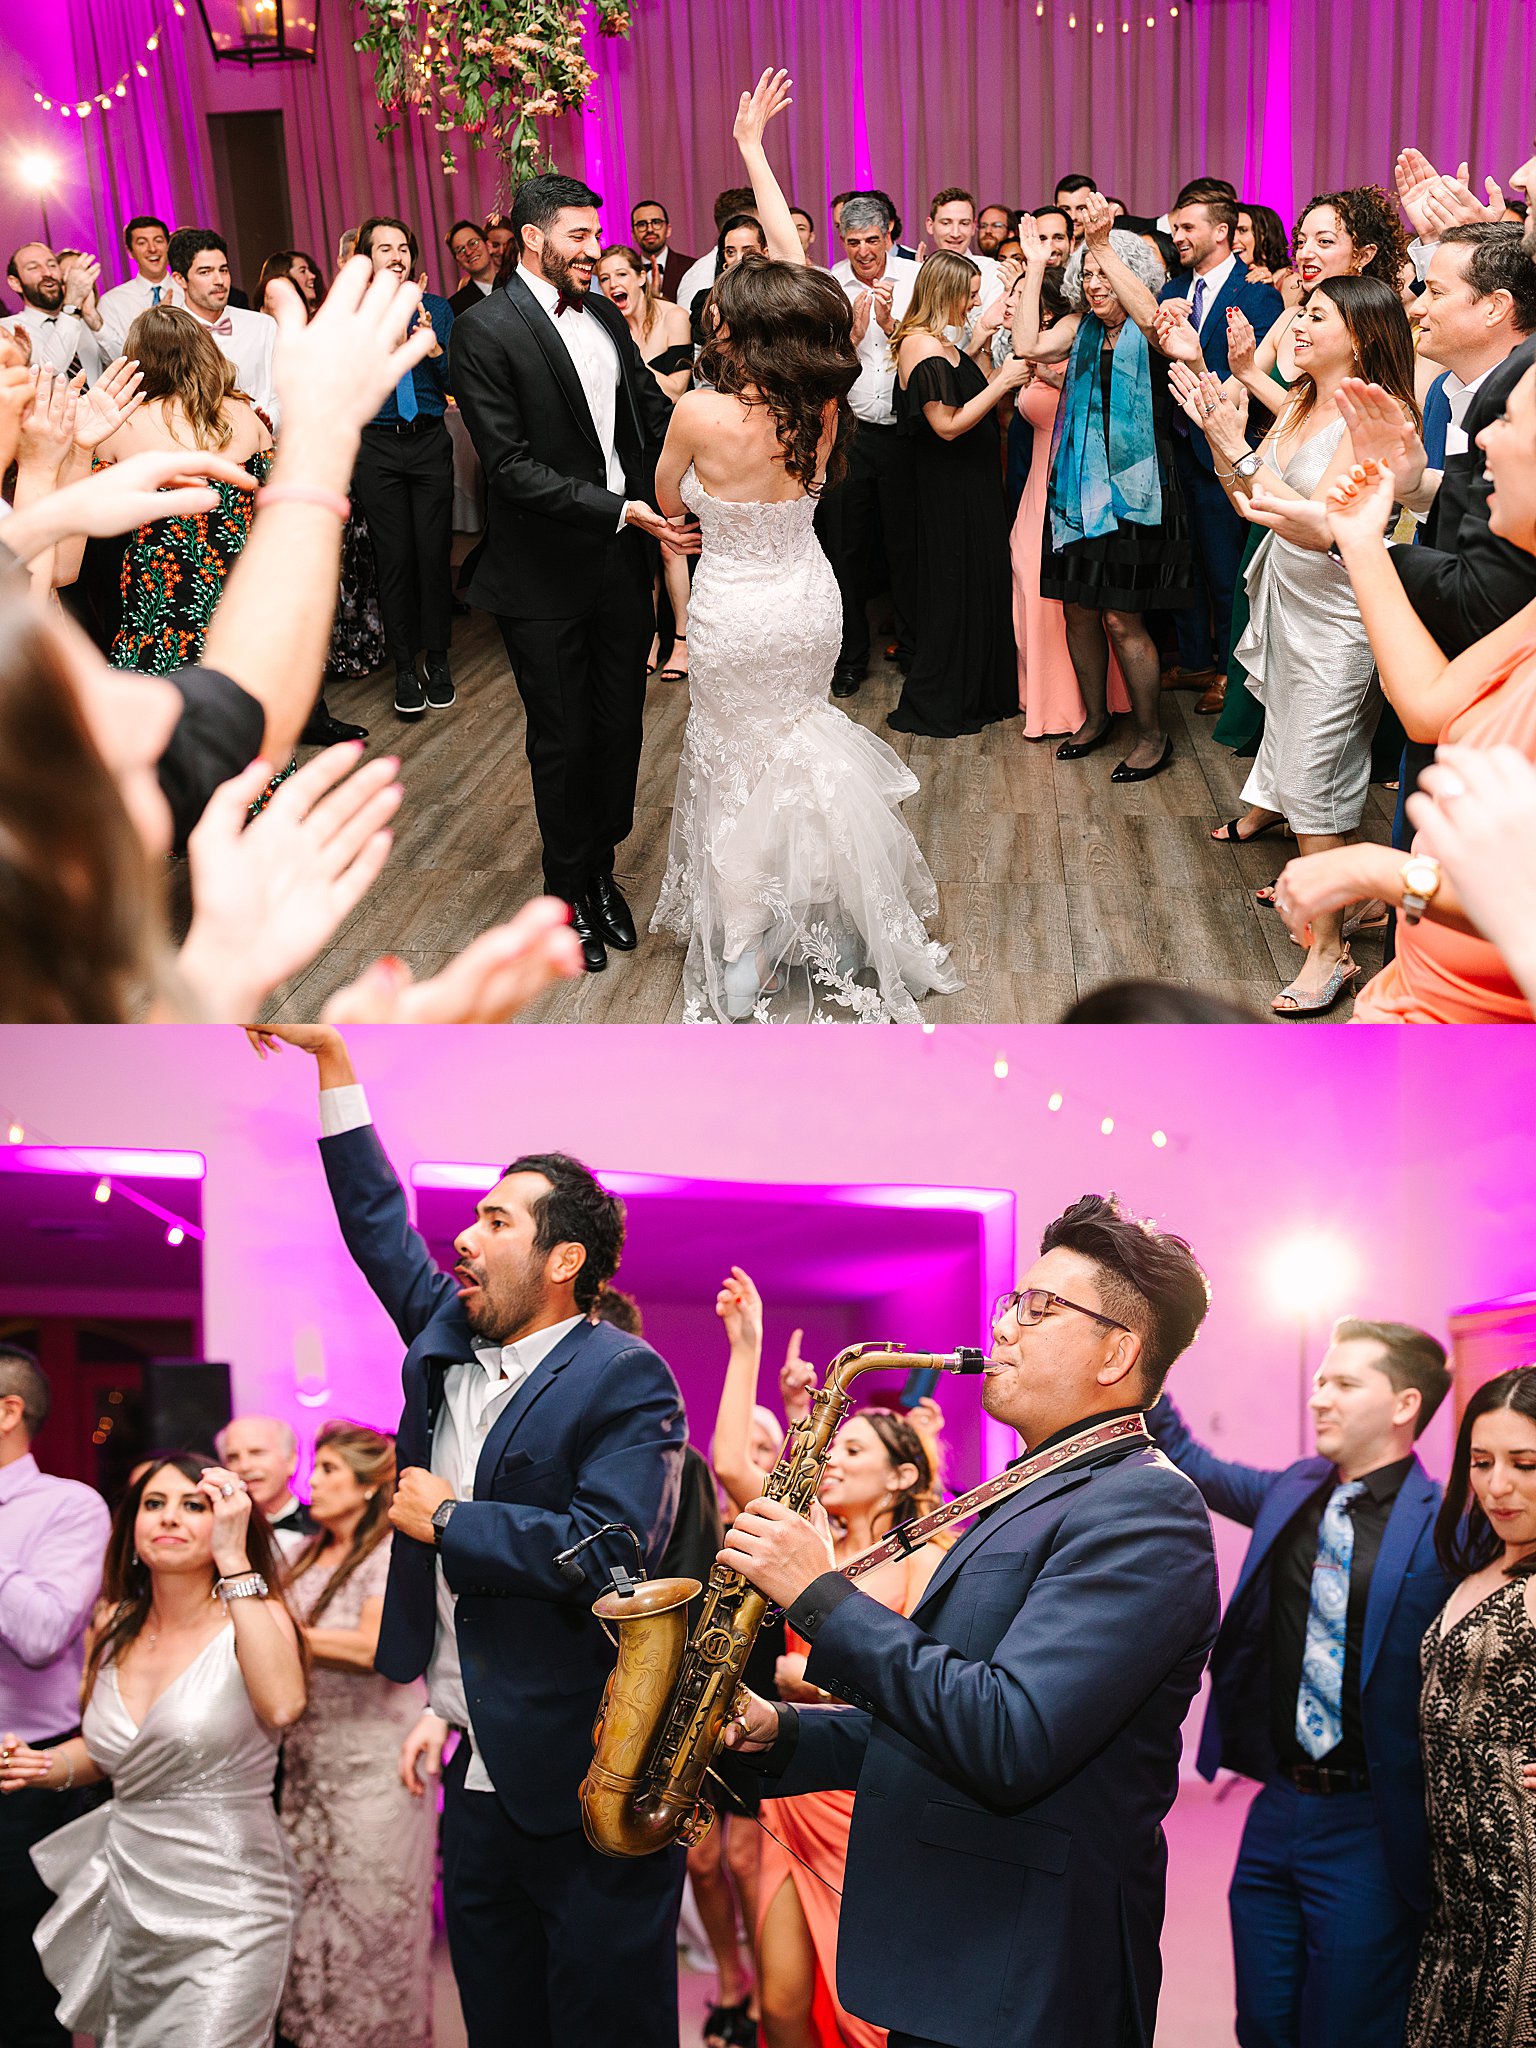 Bride and Groom dancing at reception with saxophonist